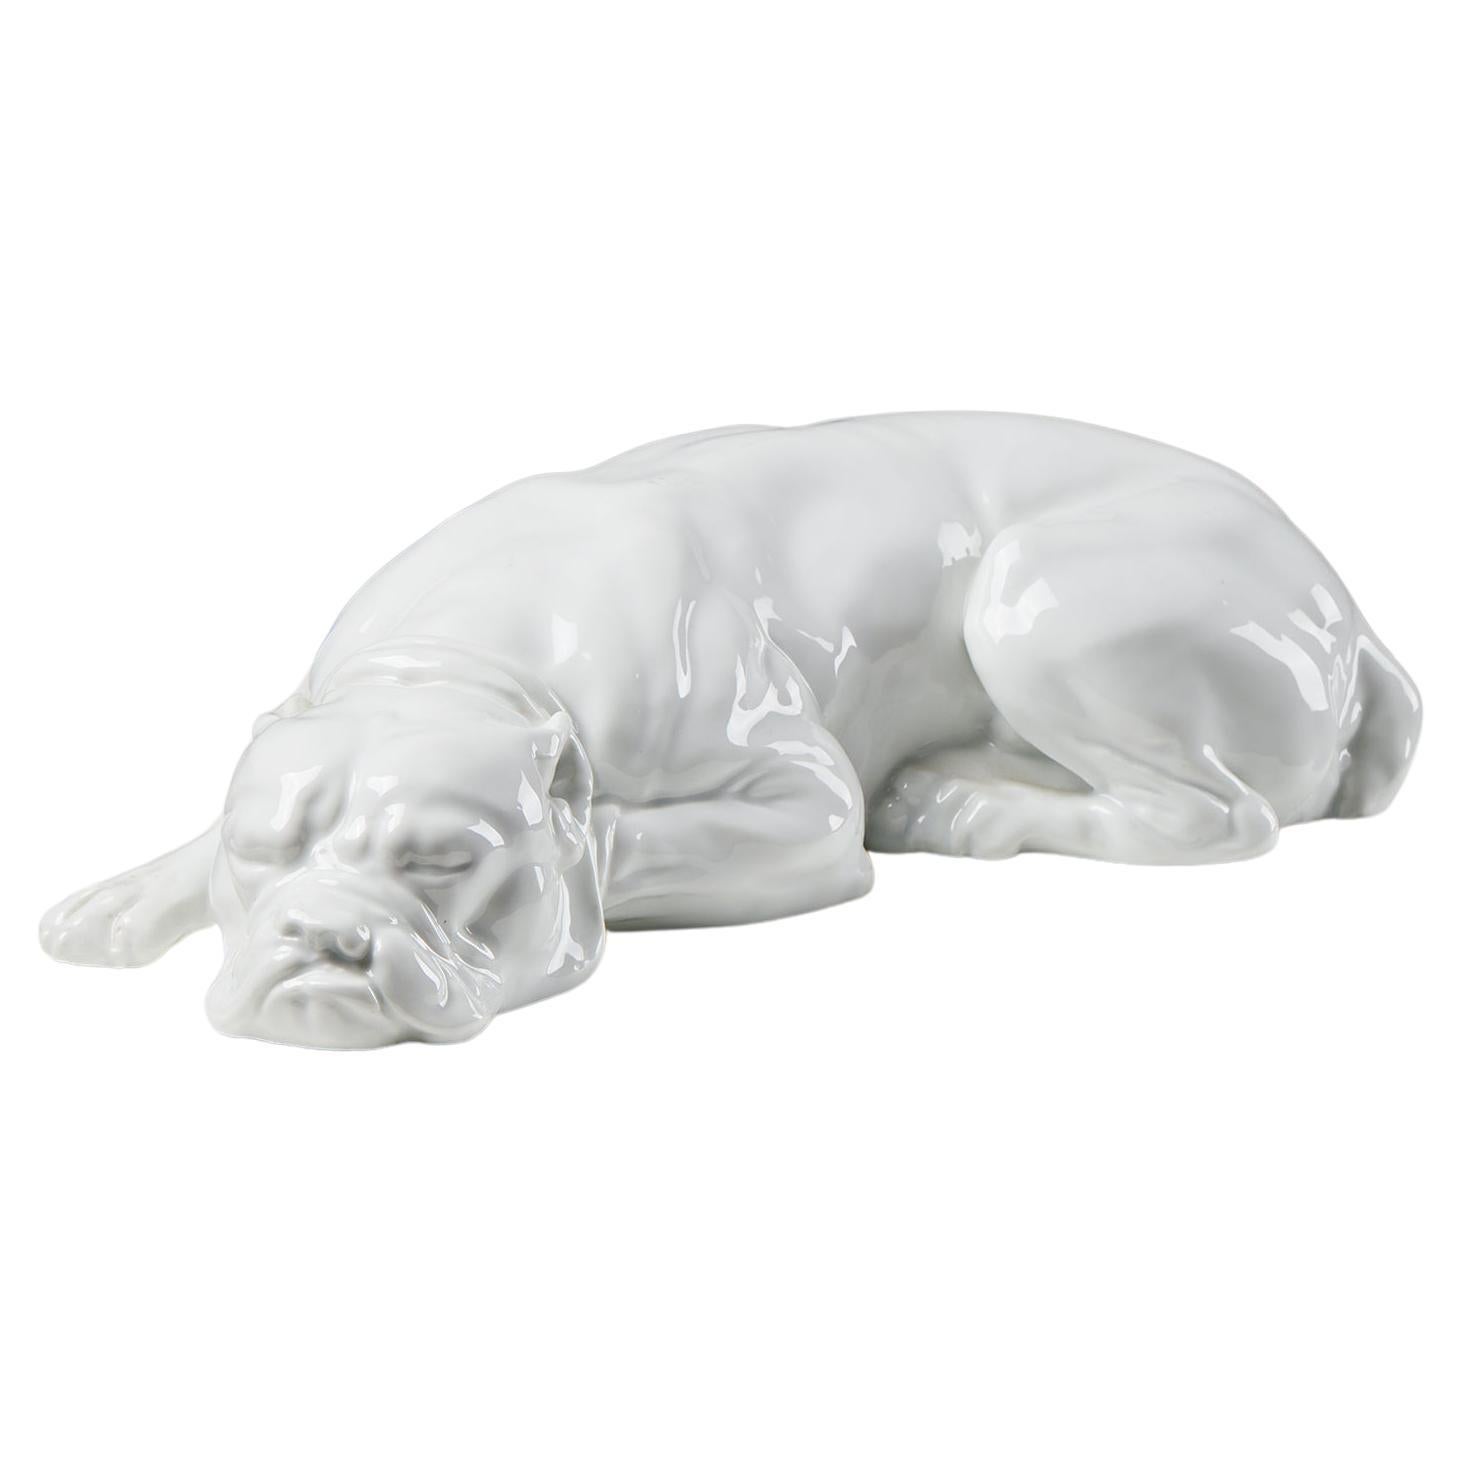 Sculpture 'Sleeping Boxer' Designed by Thure Öberg for Arabia, Finland, 1910 For Sale